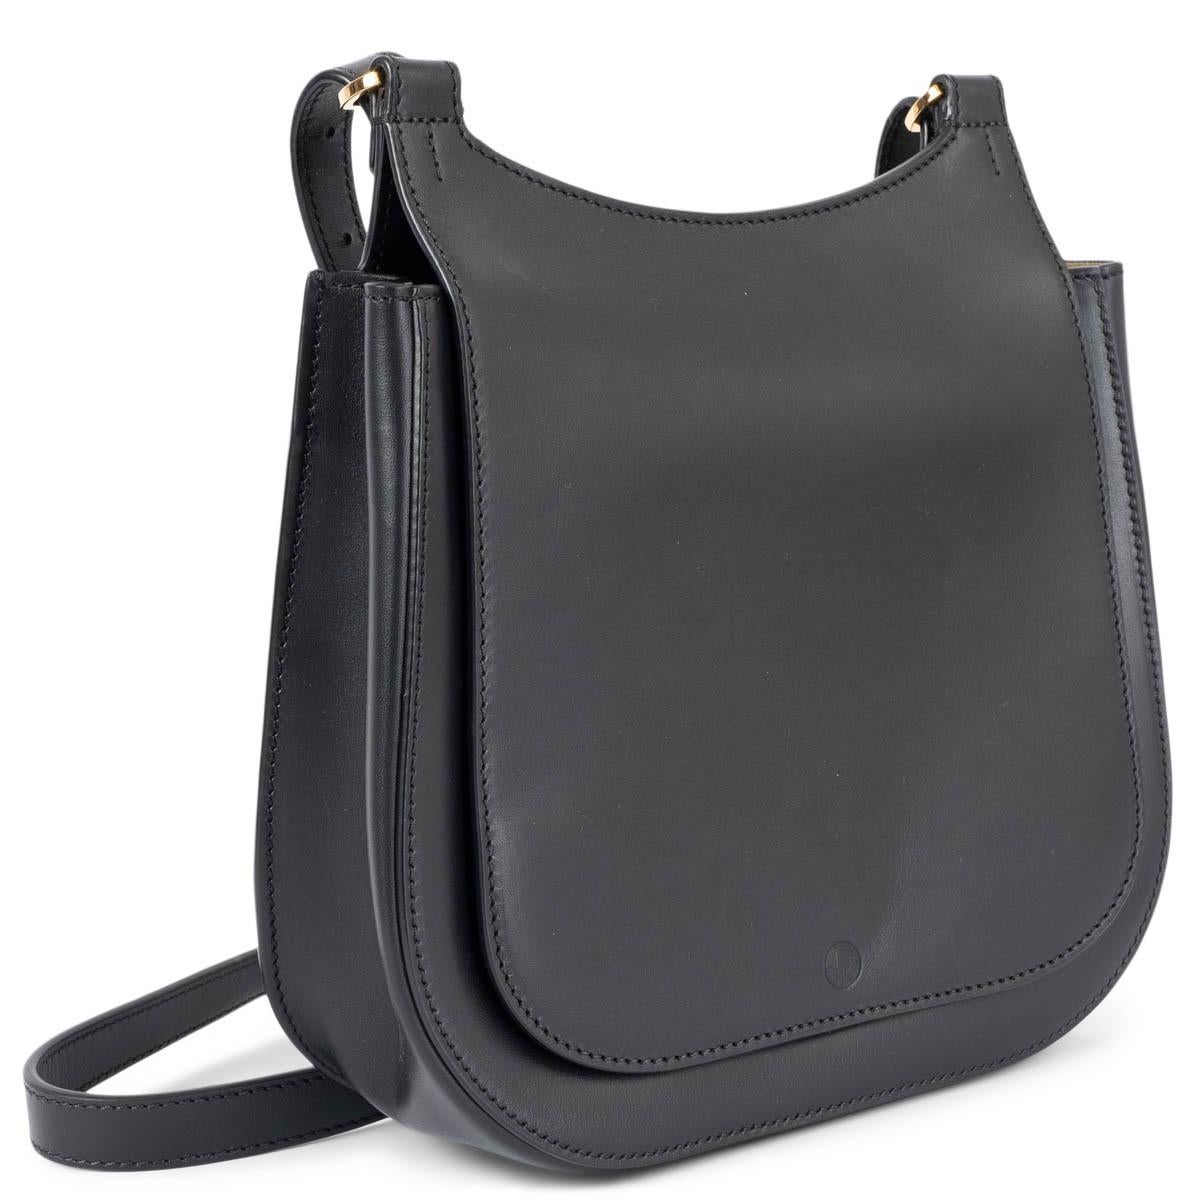 100% authentic The Row Hunting 7 crossbody bag in black smooth calfskin leather. Features an adjustable shoulder strap with gold-tone hardware and exterior pocket on the back. Closes with a concealed magnetic snap under the flap. Lined in beige